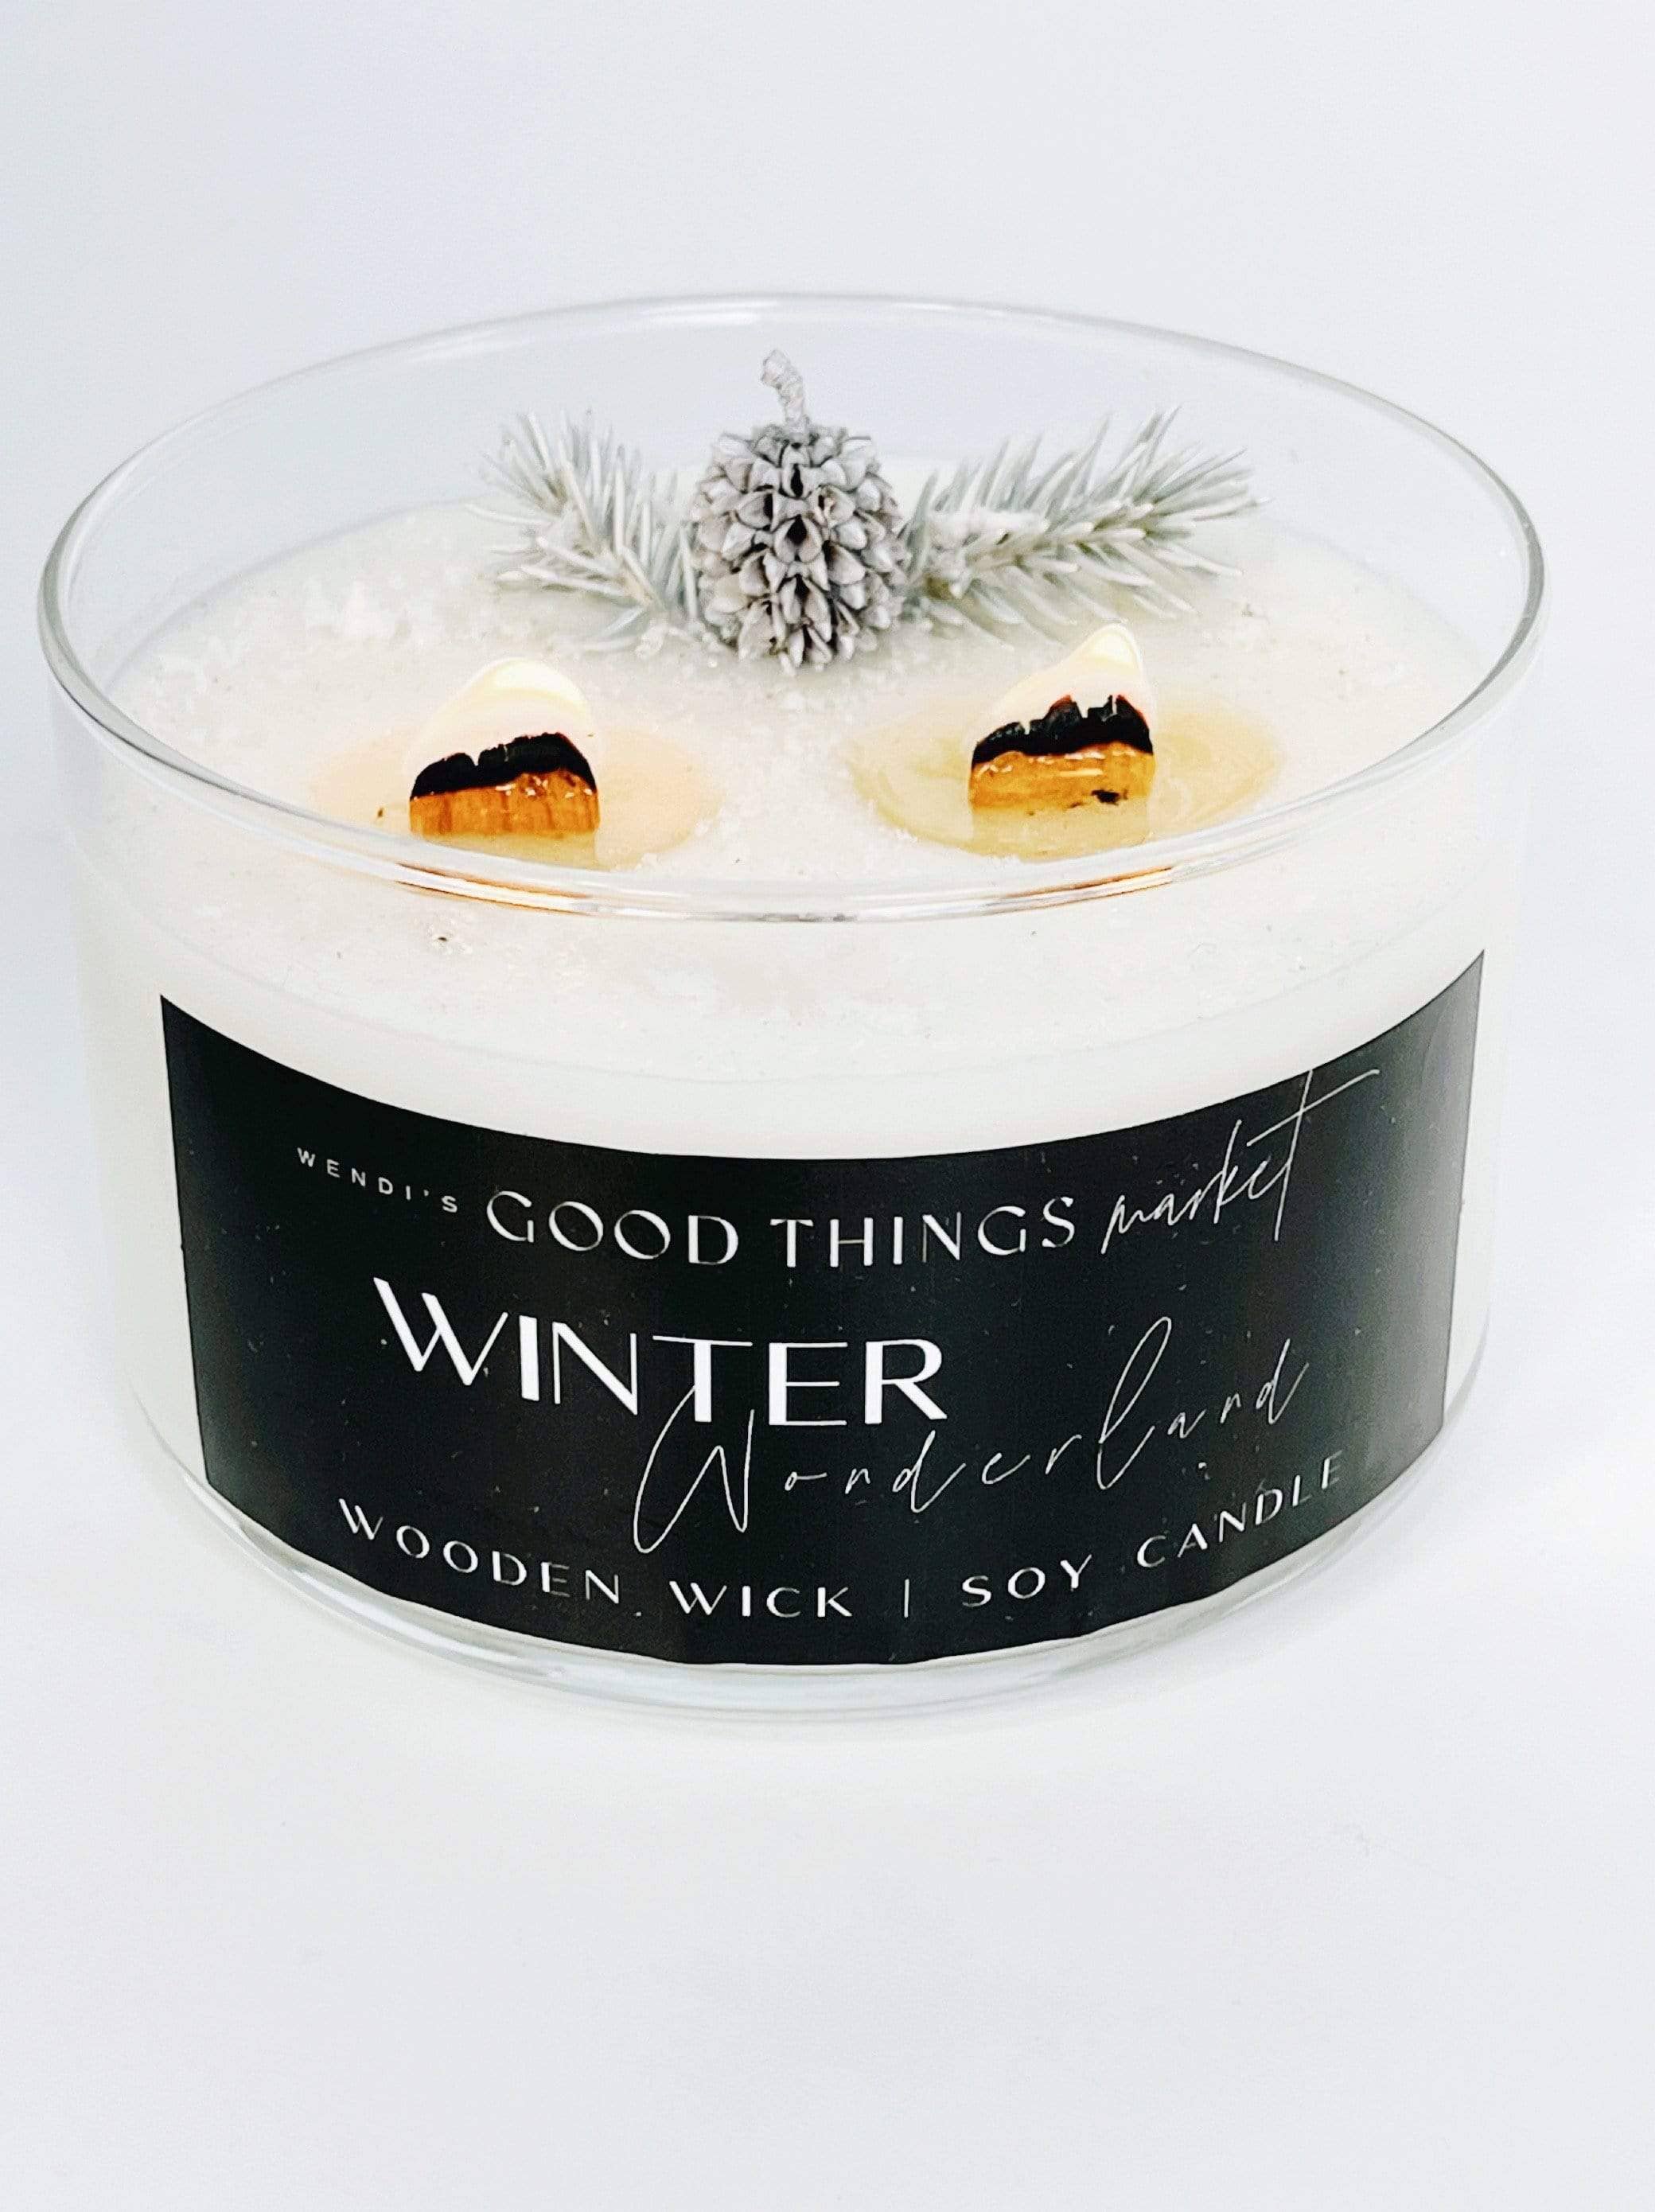 Winter Wonderland Wooden Wick Soy Candle – Willow Mountain Limited